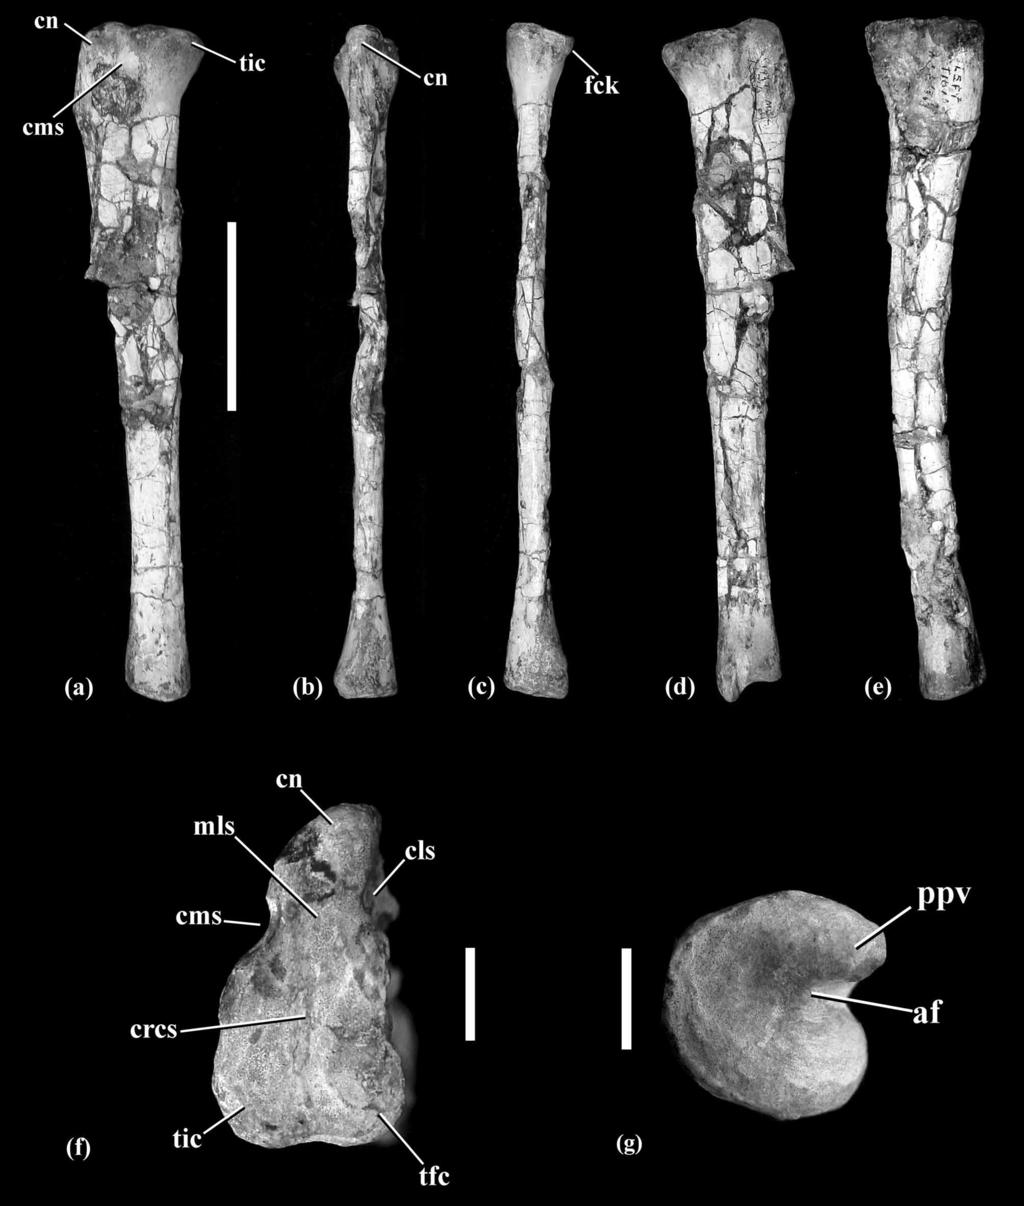 FIGURE 28. Photographs of the right tibia in medial (a), cranial (b), caudal (c) and lateral (d) views; the left tibia in medial view (e), and the right tibia in proximal (f) and distal (g) views.